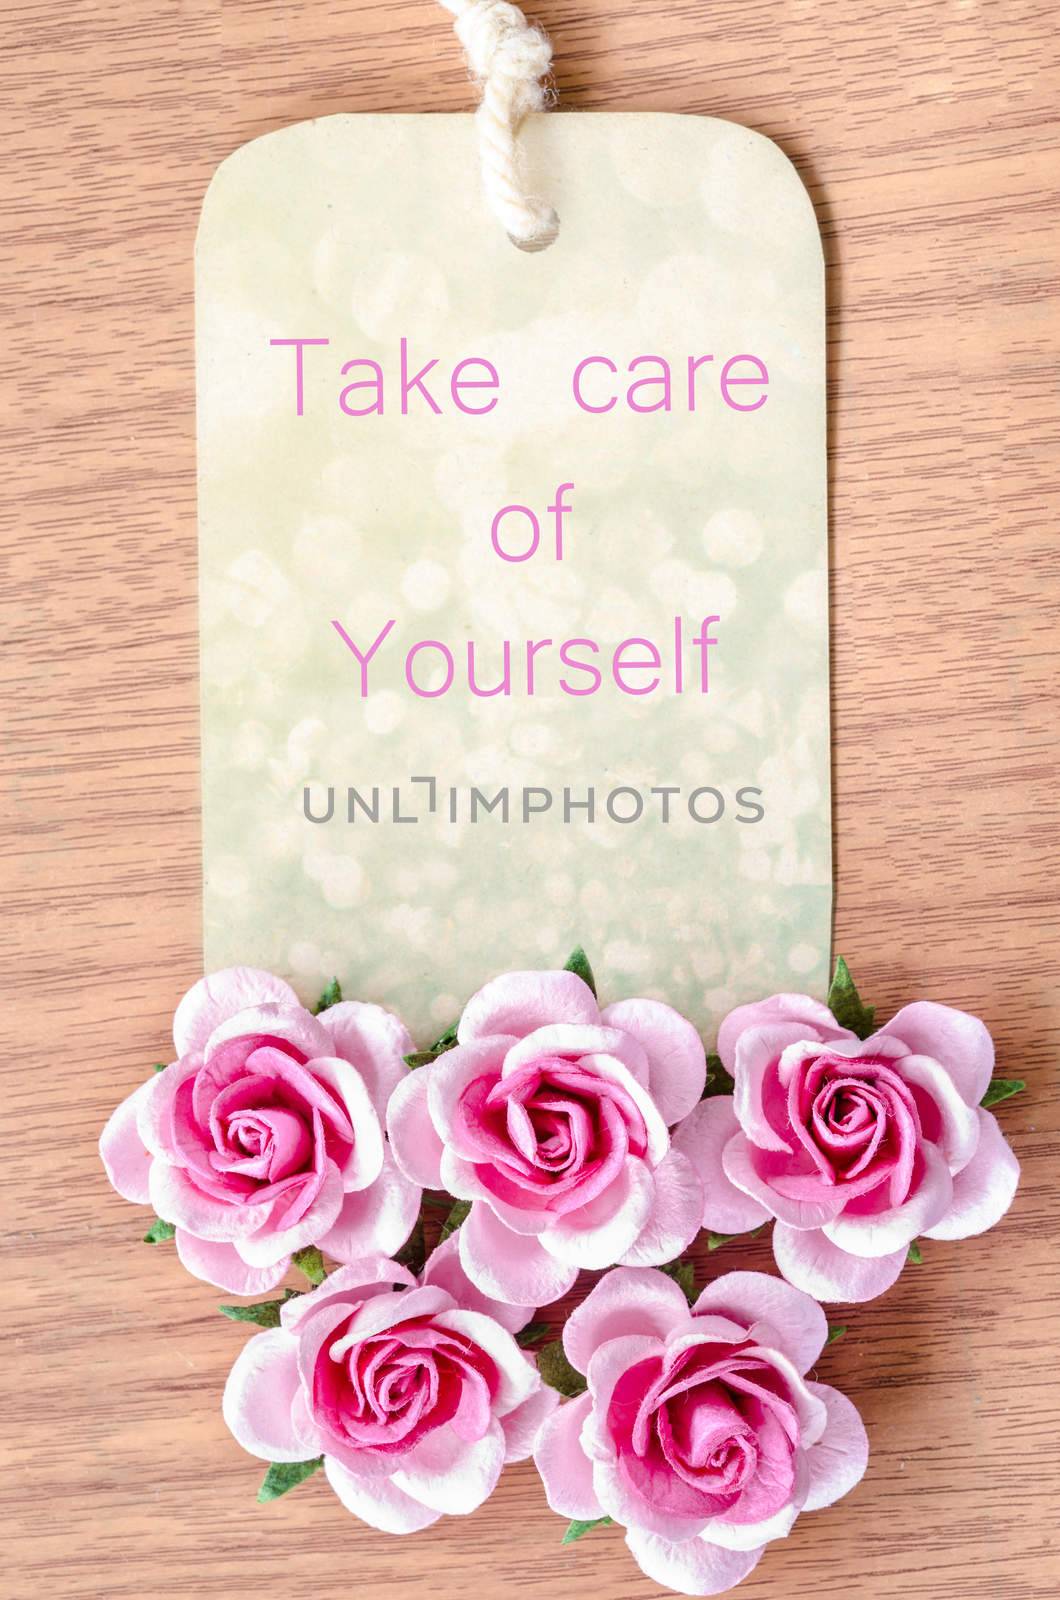 Take care of your self on beautiful tag pink rose on wooden background.